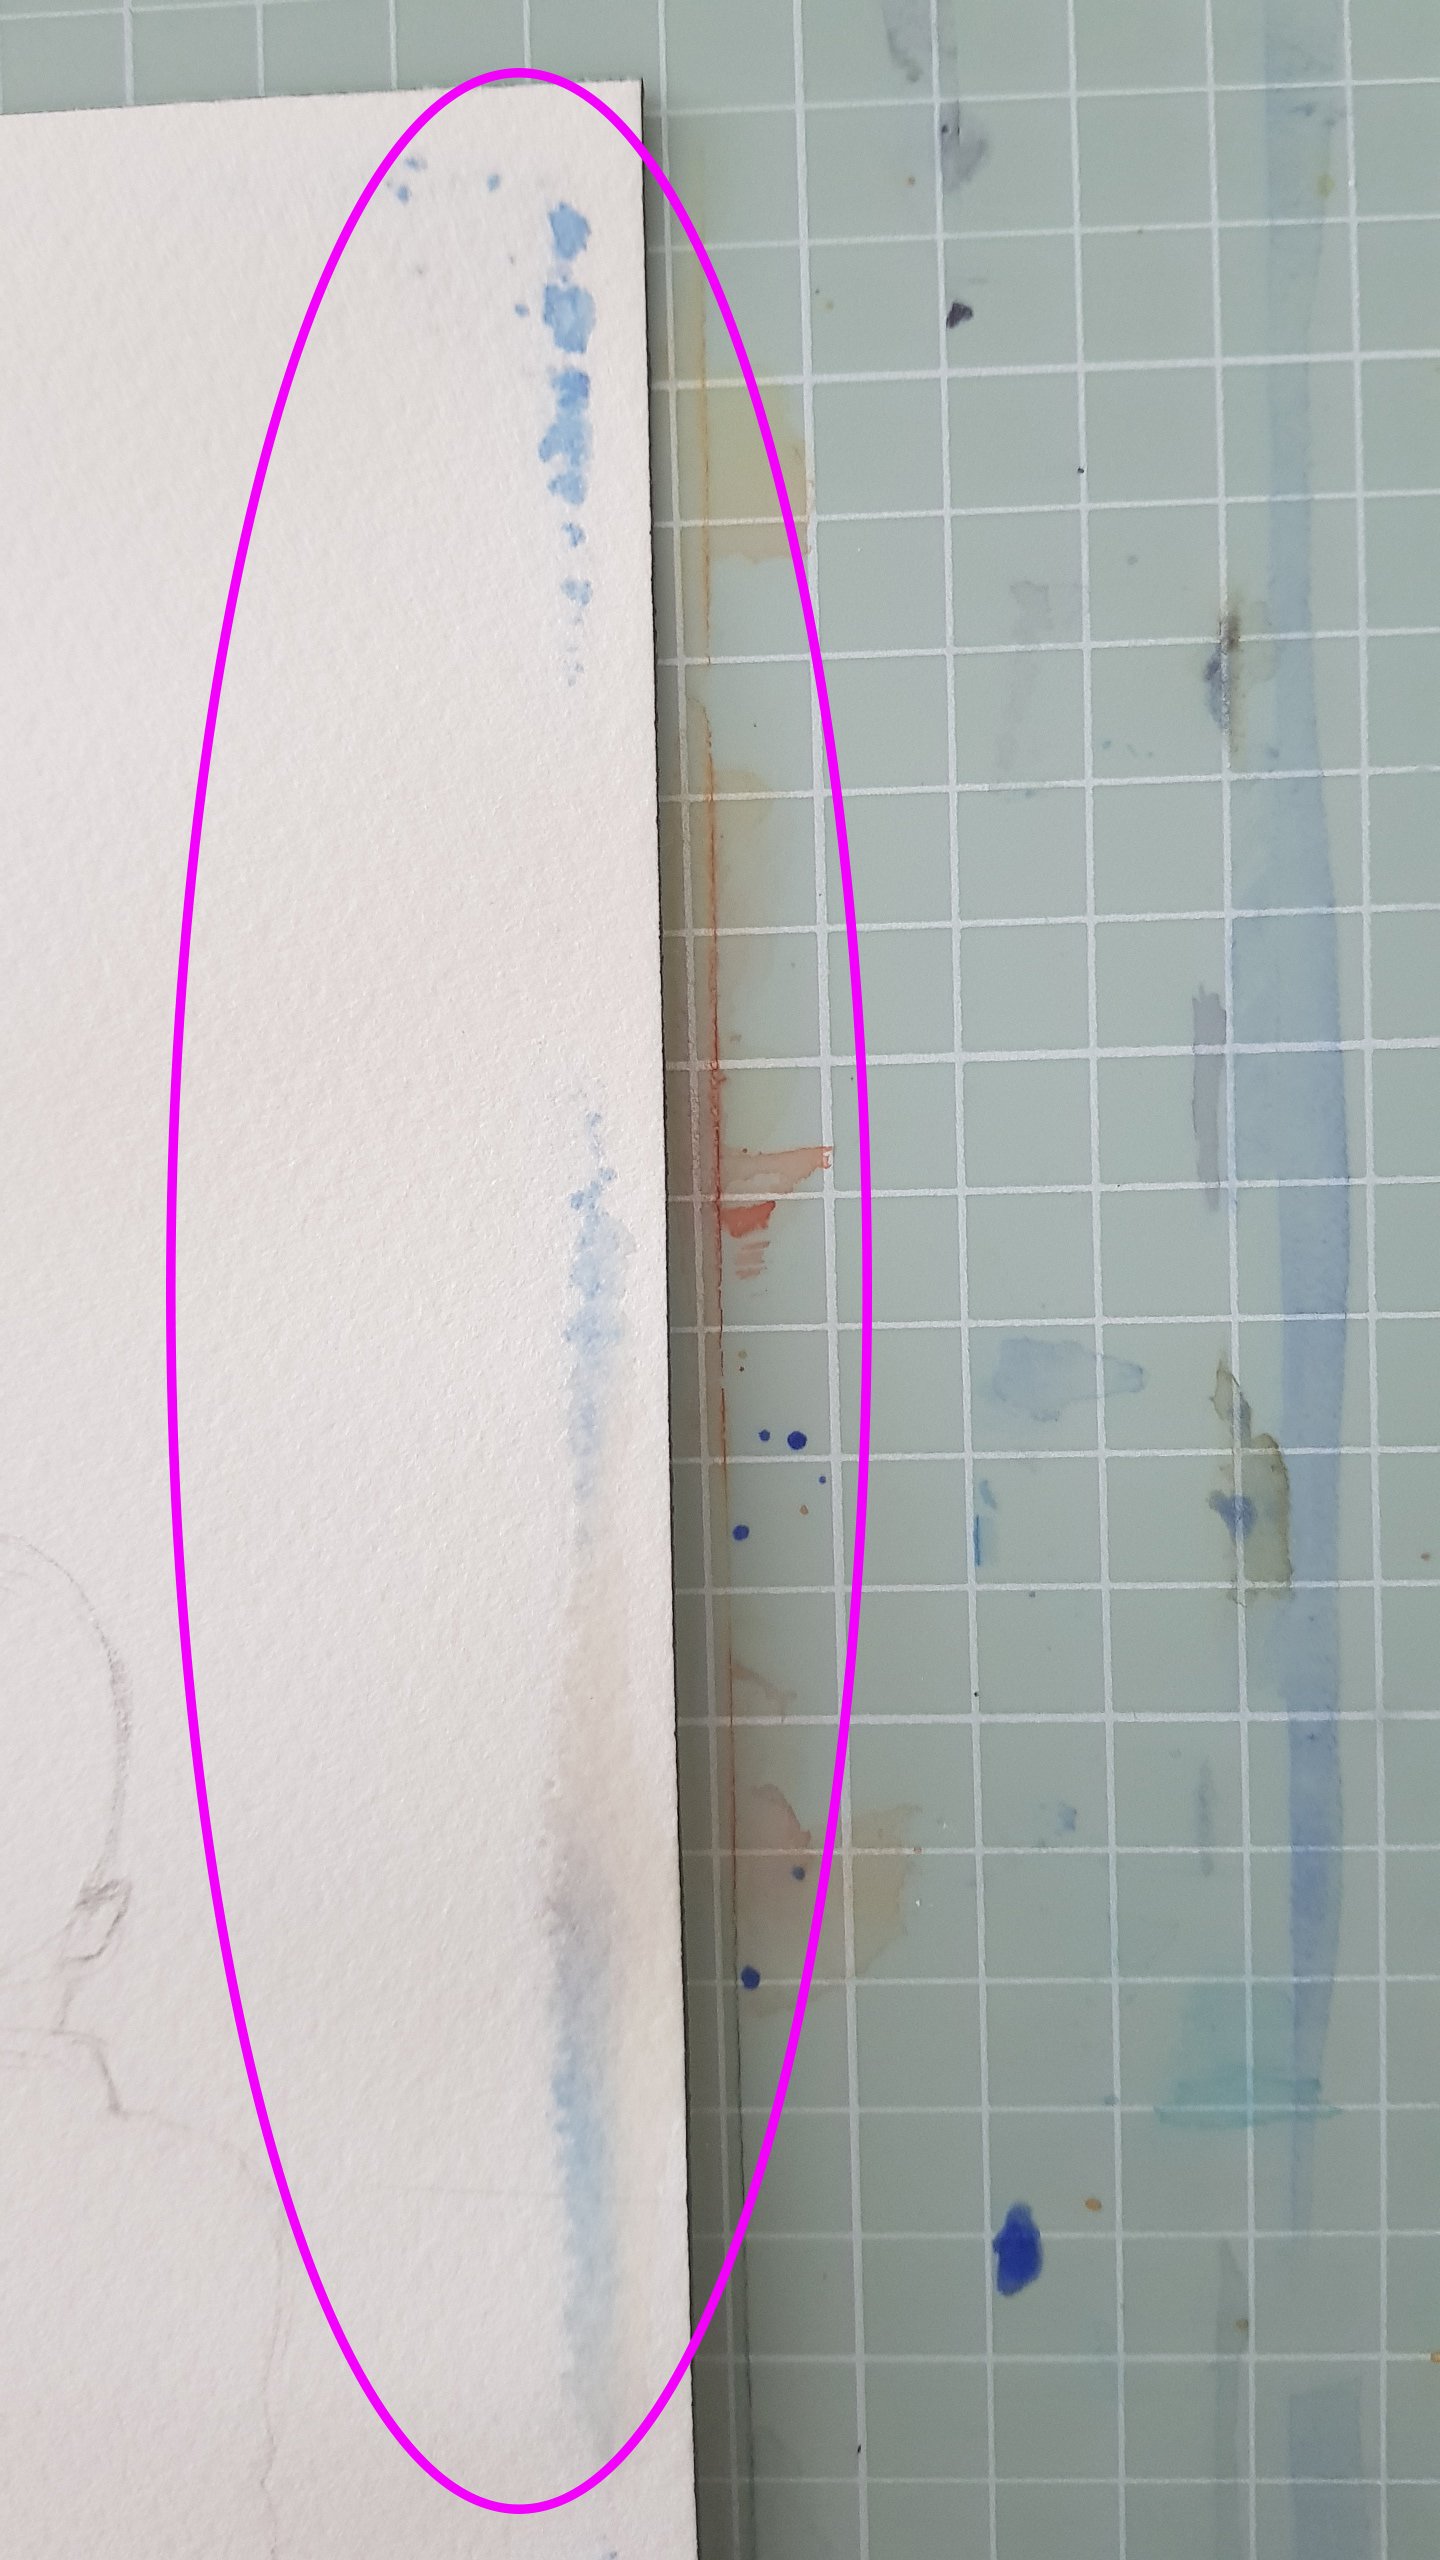 Watercolor Paper Gone Bad - water and paint have gone through the paper, all the way to the back of the page